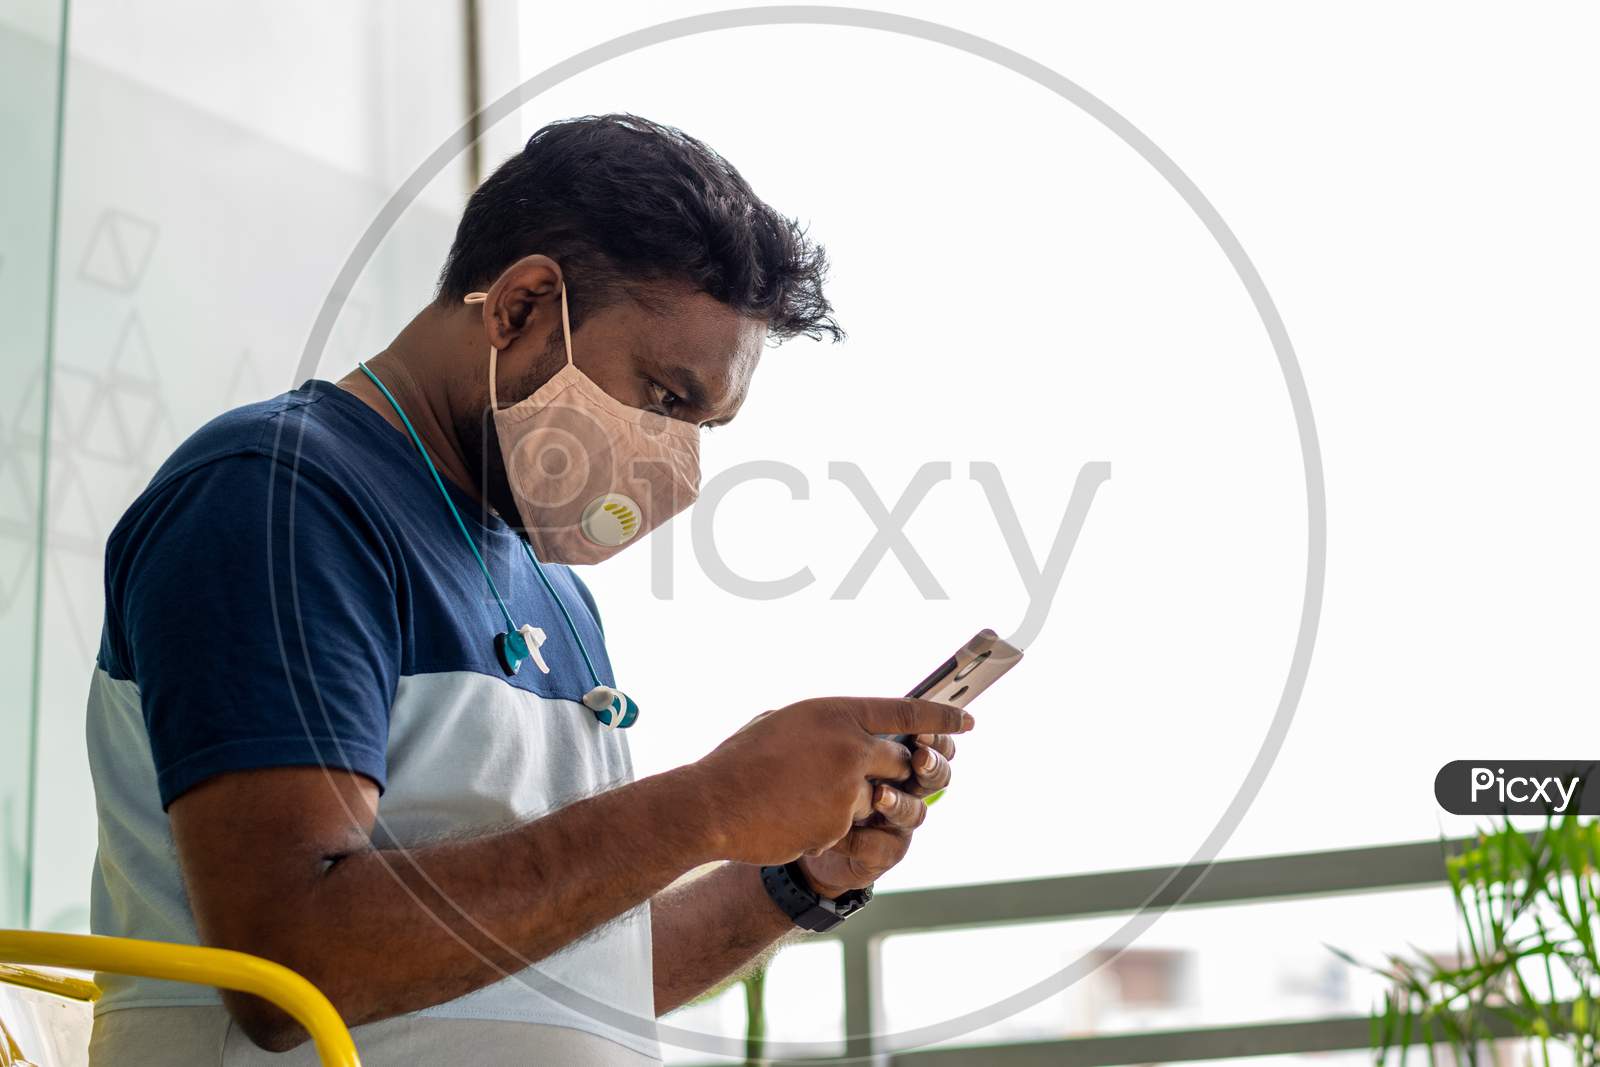 A person using his phone and wearing a mask to protect himself from Novel Corona Virus Covid-19